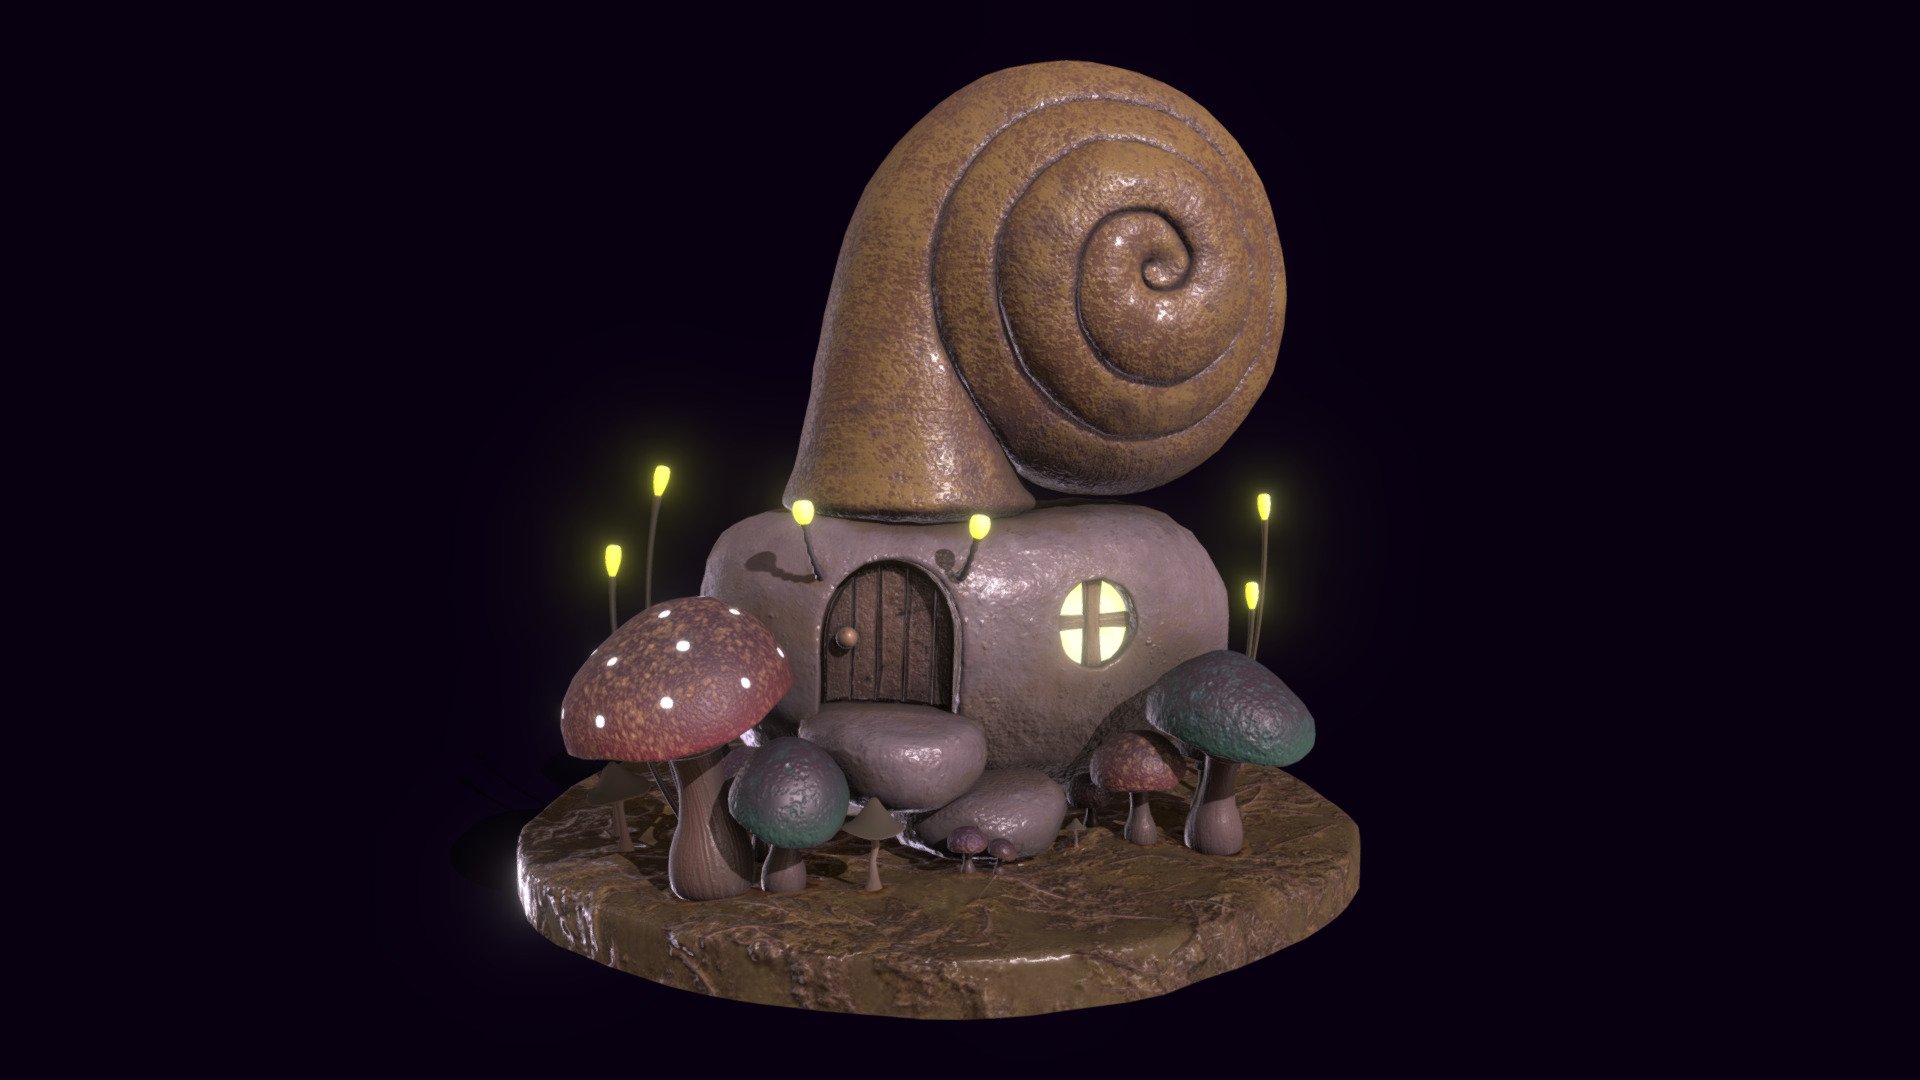 Fantasy Stylized Snail House model made in 3ds Max 2022 and textured in Substance painter. Some elements are hand-painted, nothing is sculpted.

Nothing is rigged/animated 3d model